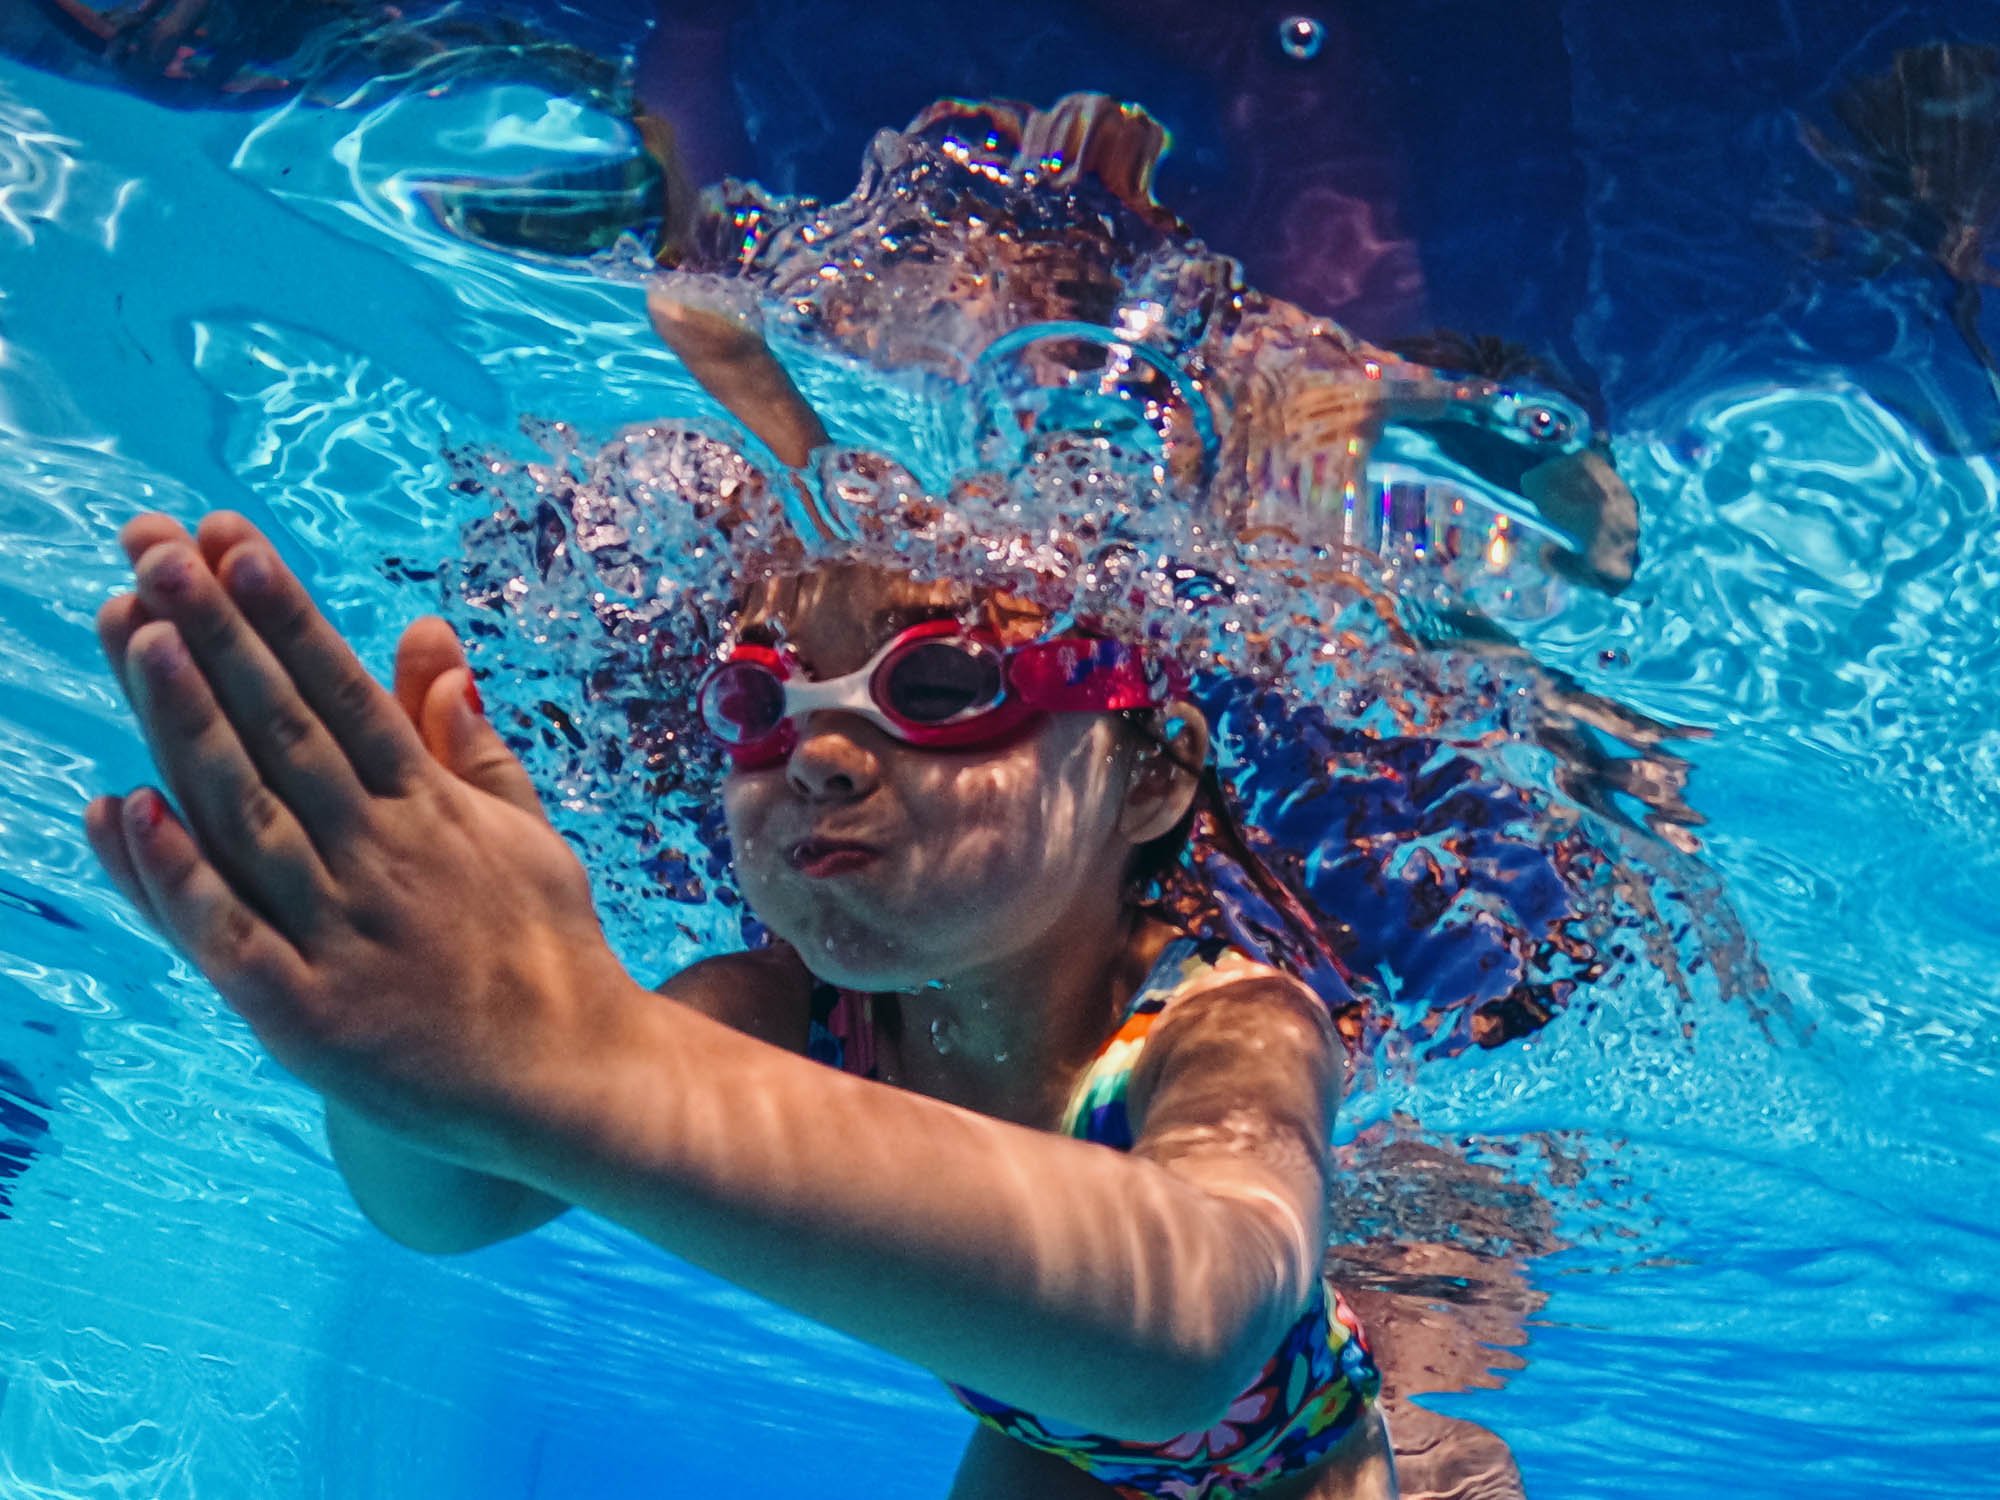 girl-swimming-underwater-pool-goggles-underwater-portrait-unposed-family-holiday-photography.jpg